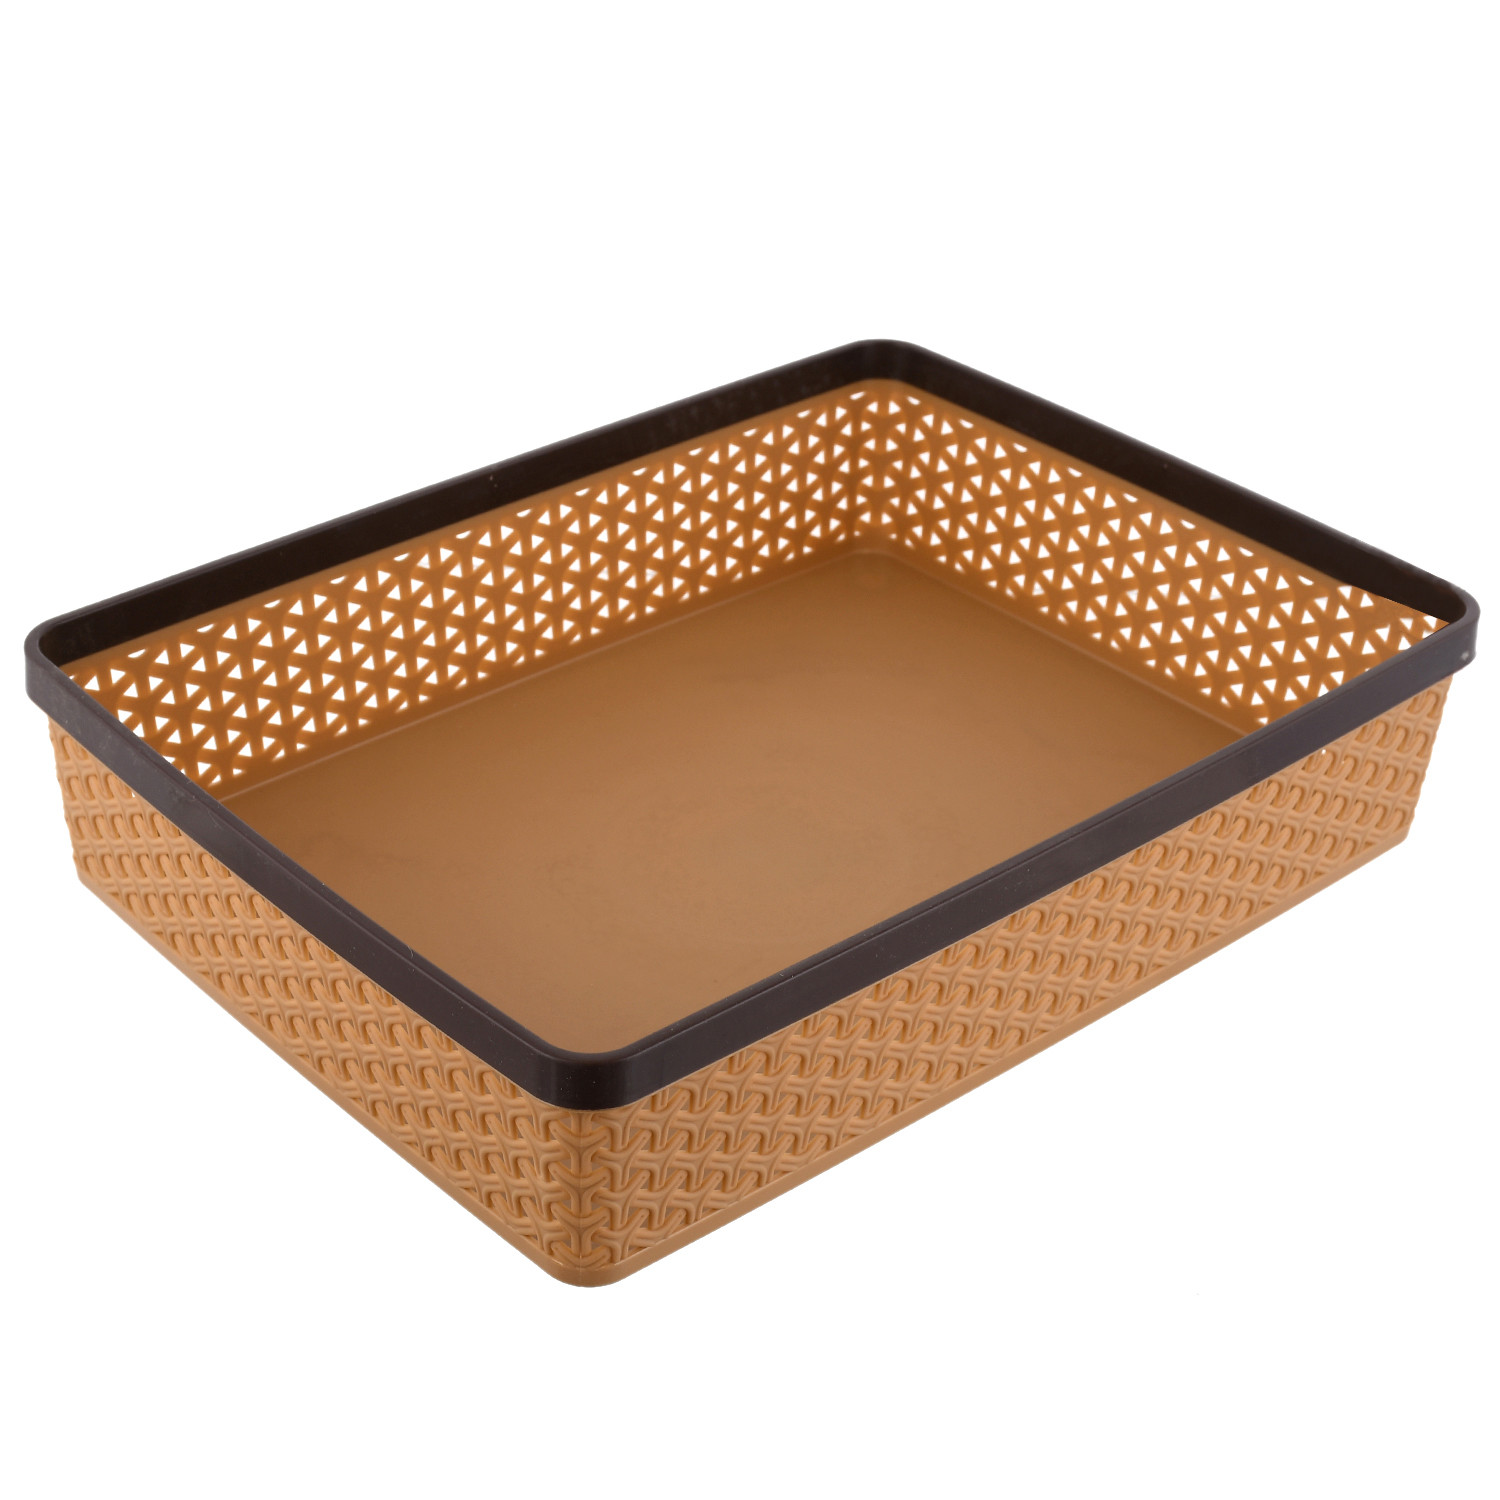 Kuber Industries Plastic 2 Pieces Solitaire Stationary Office Tray, File Tray, Document Tray, Paper Tray A4 Documents/Papers/Letters/folders Holder Desk Organizer (Brown & Coffee)